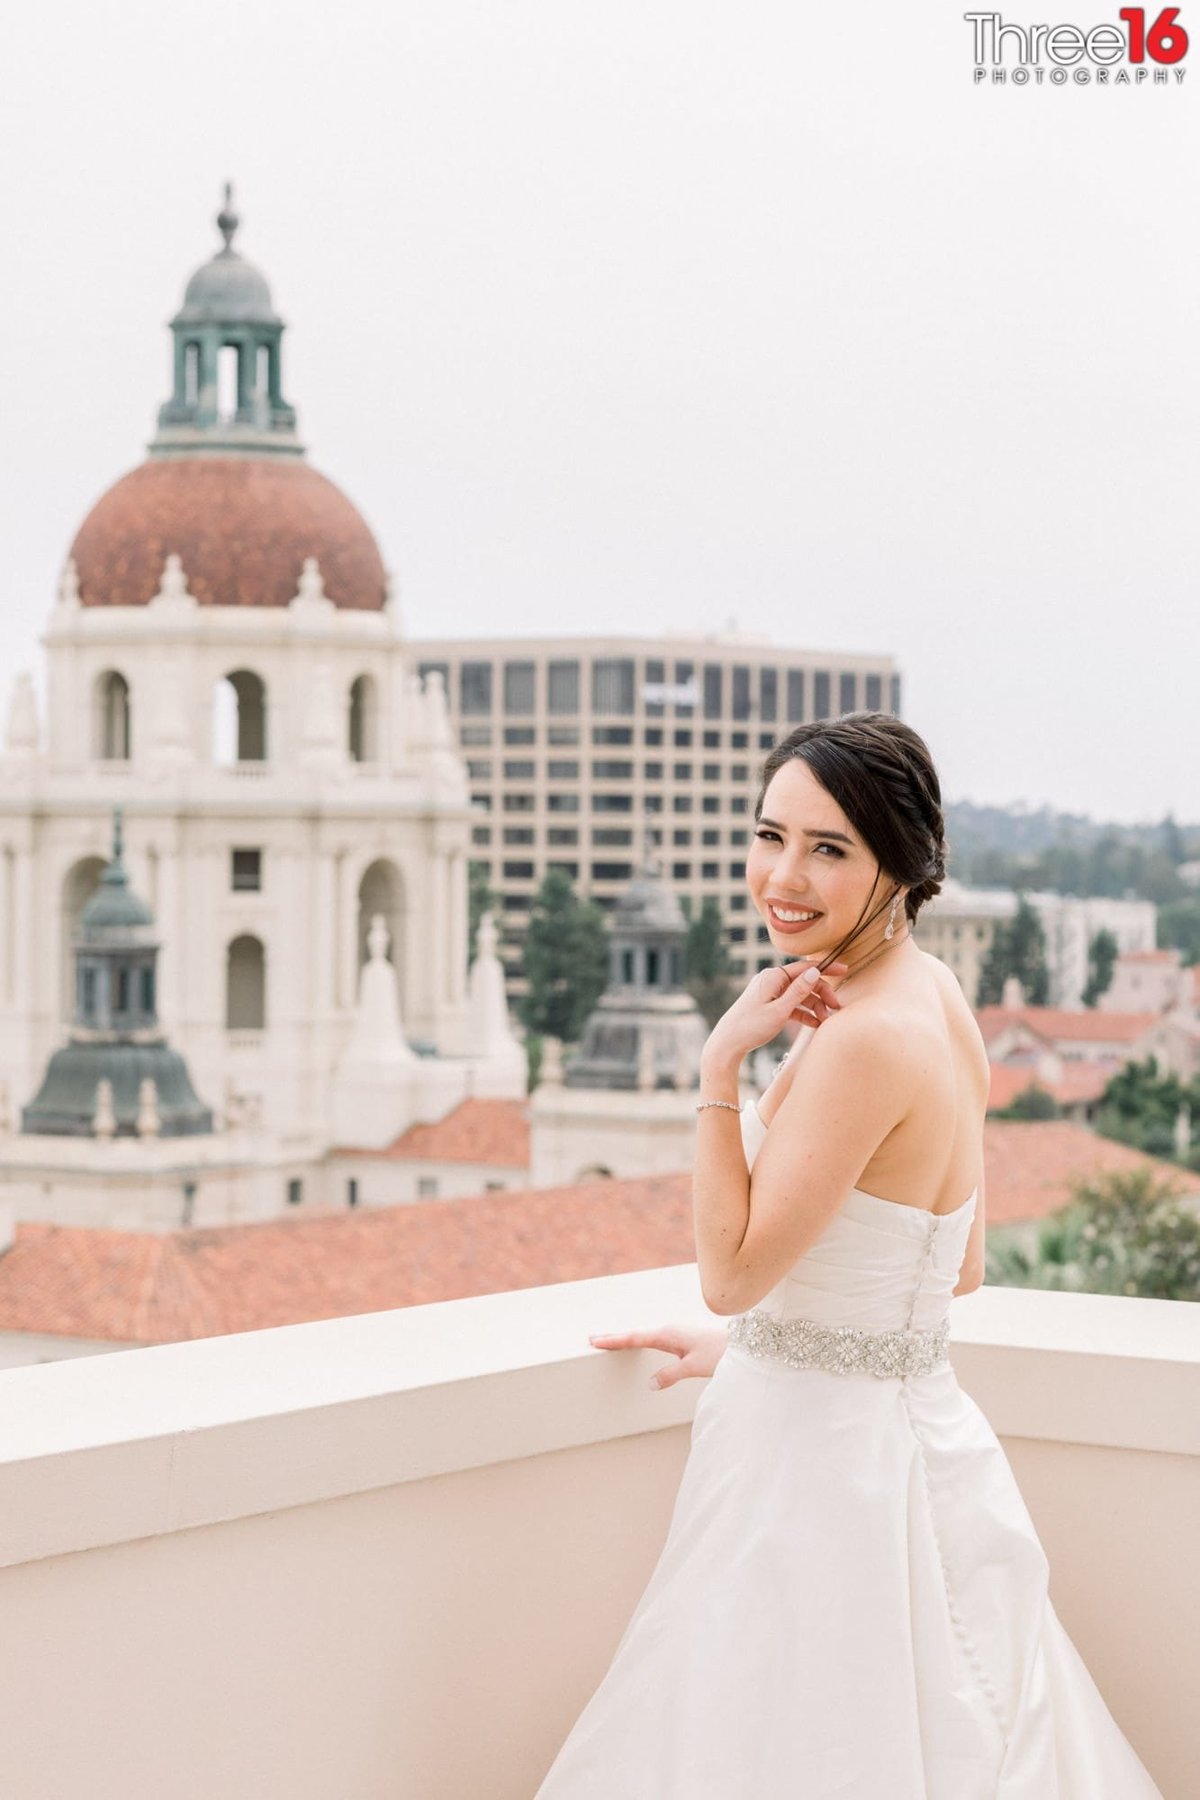 Beautiful Bride on the balcony looking out over the City of Pasadena